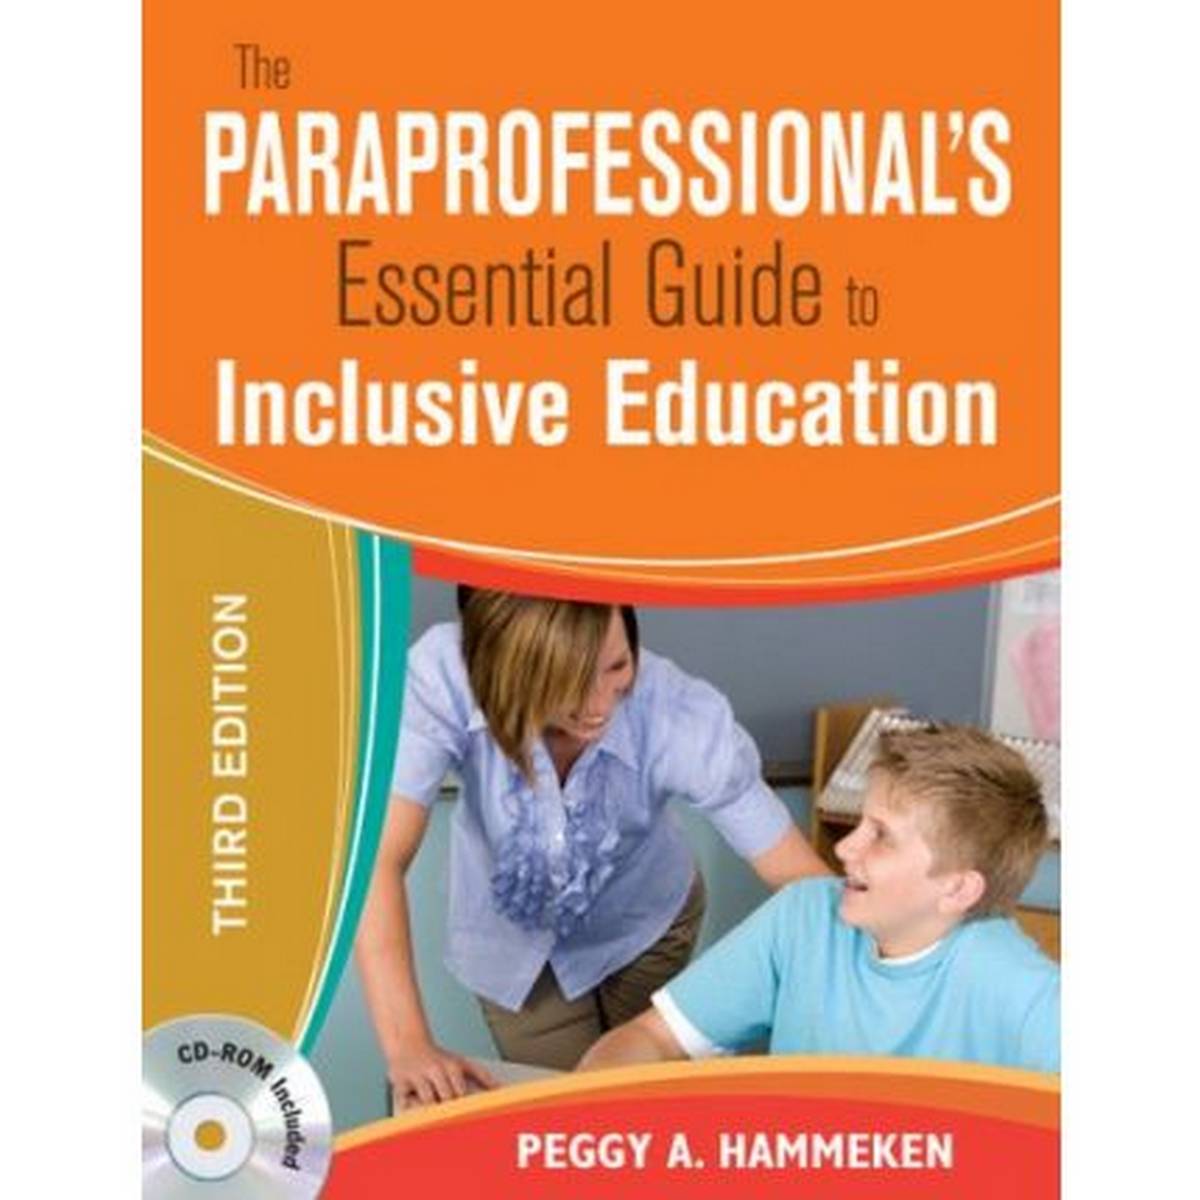 Paraprofessional's Essential Guide to Inclusive Education